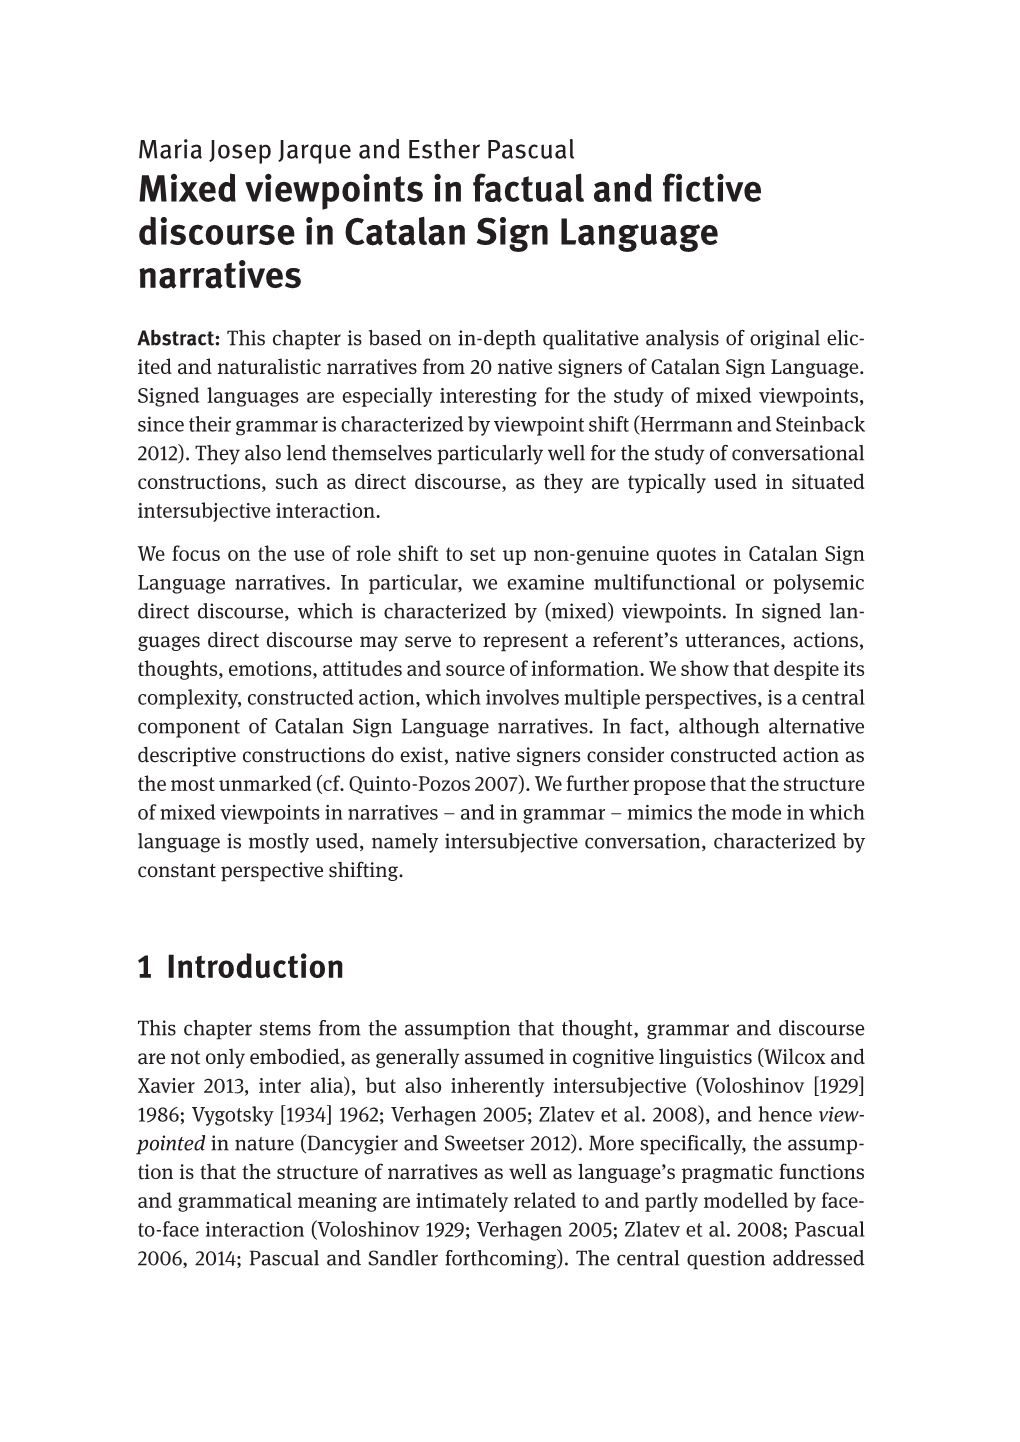 Mixed Viewpoints in Factual and Fictive Discourse in Catalan Sign Language Narratives